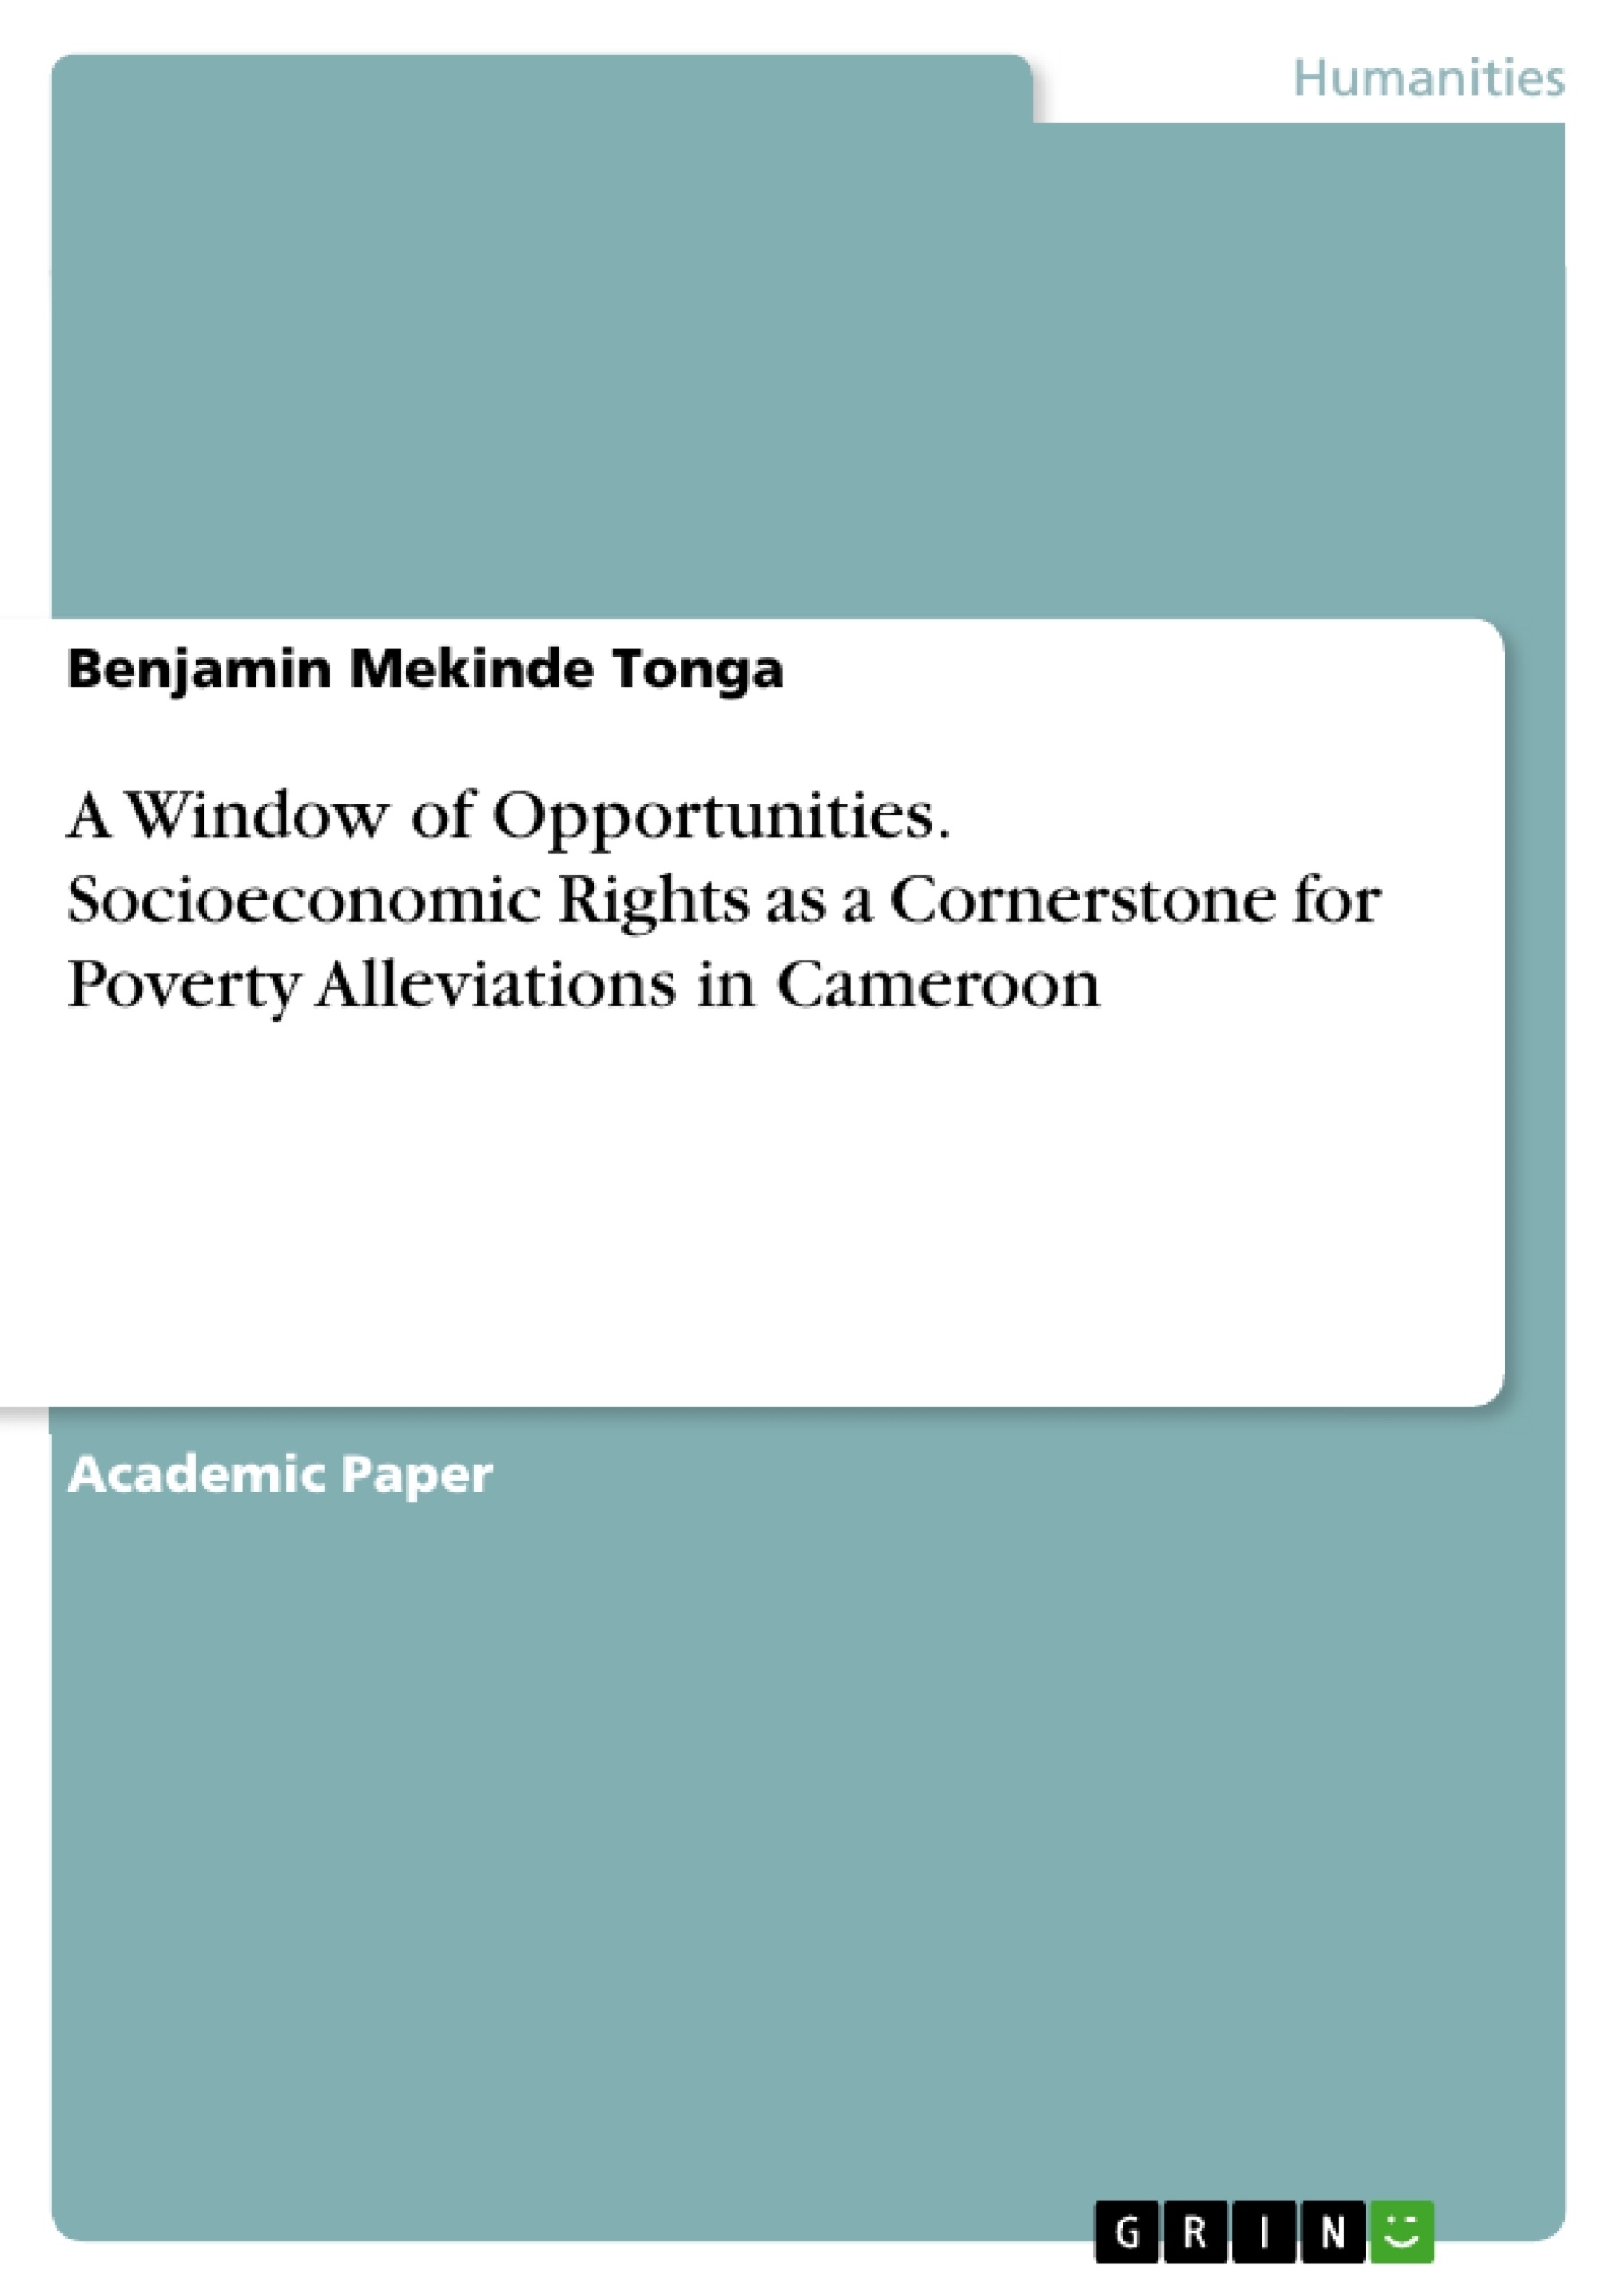 Title: A Window of Opportunities. Socioeconomic Rights as a Cornerstone for Poverty Alleviations in Cameroon